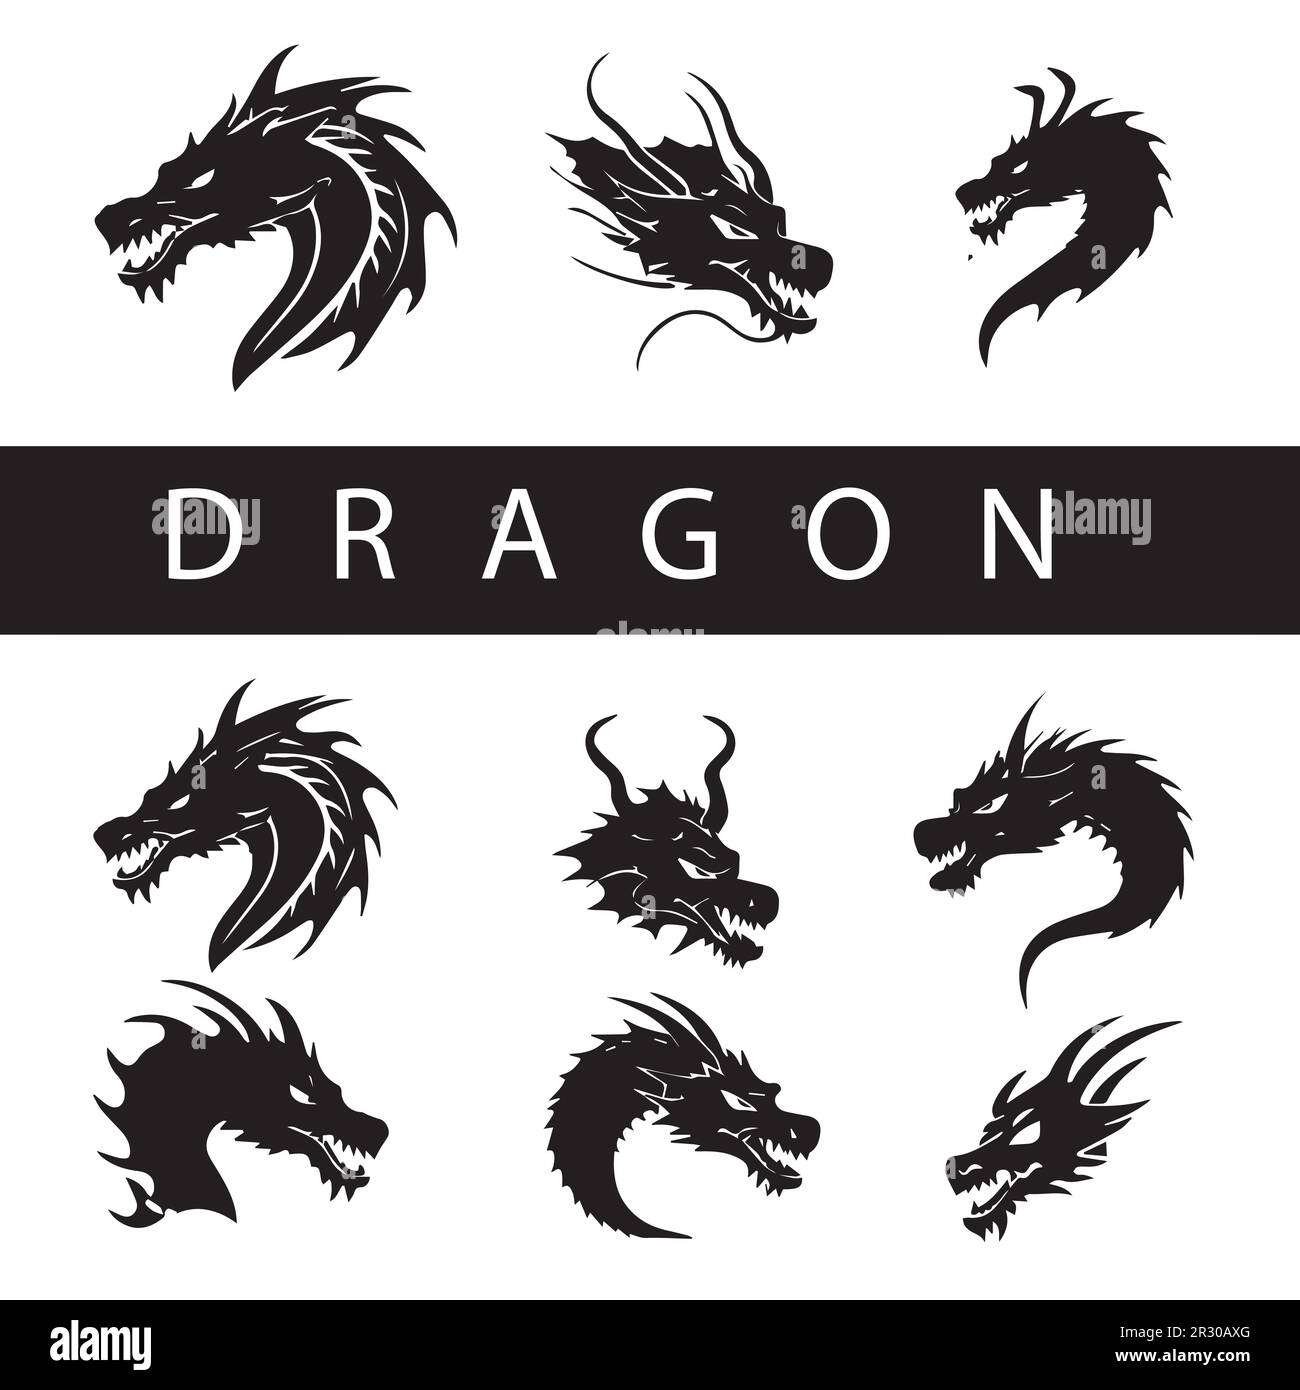 A black collection of dragon vector illustrations. Stock Vector